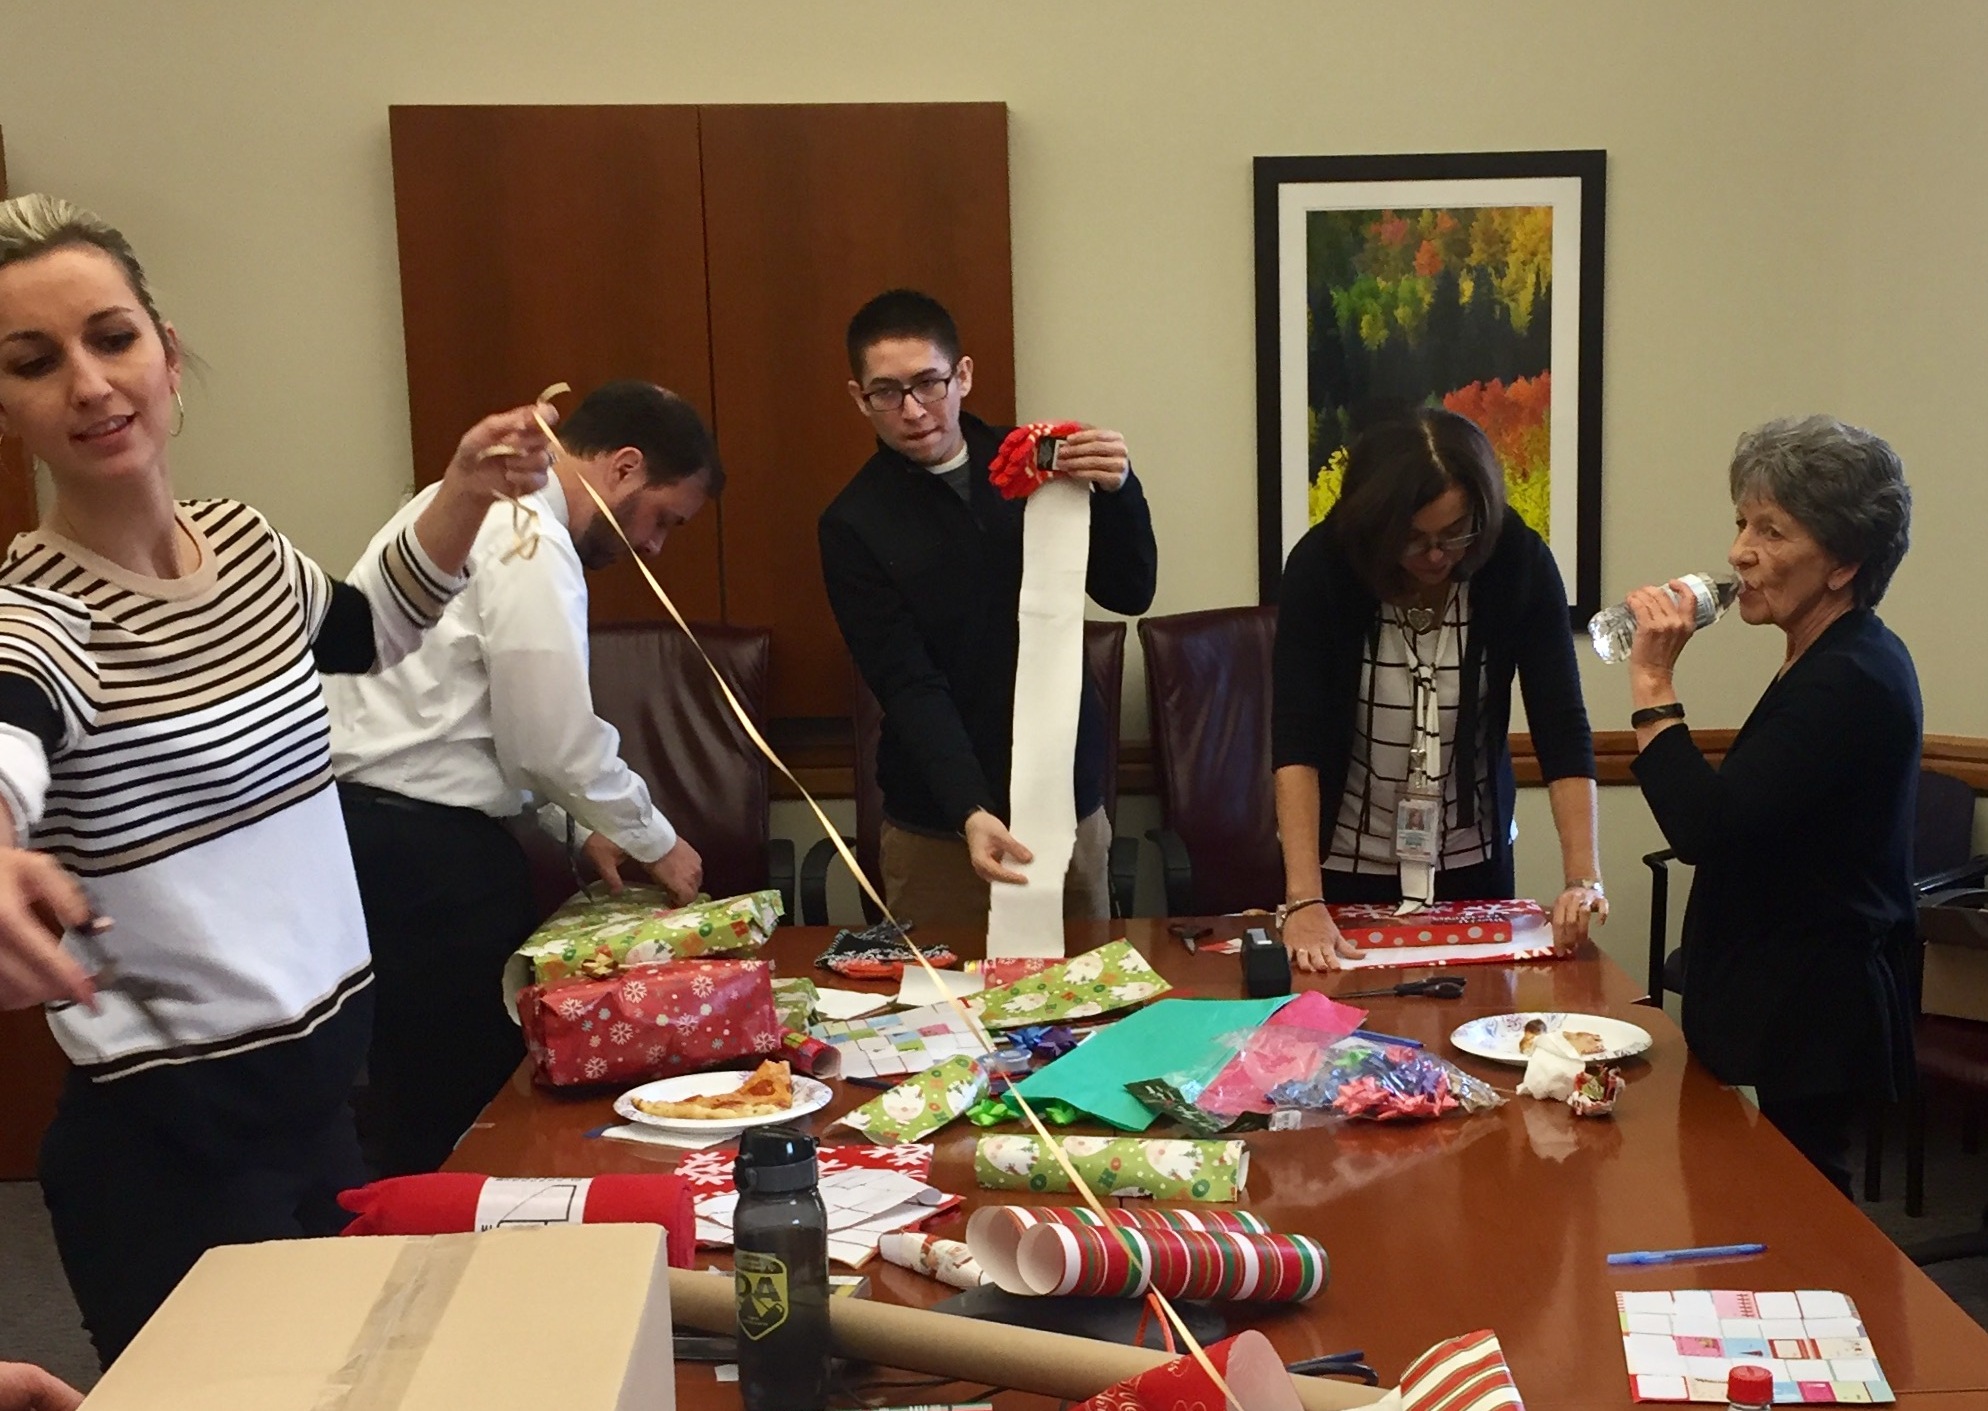 Image 9: Wrapping for Adopt-A-Family